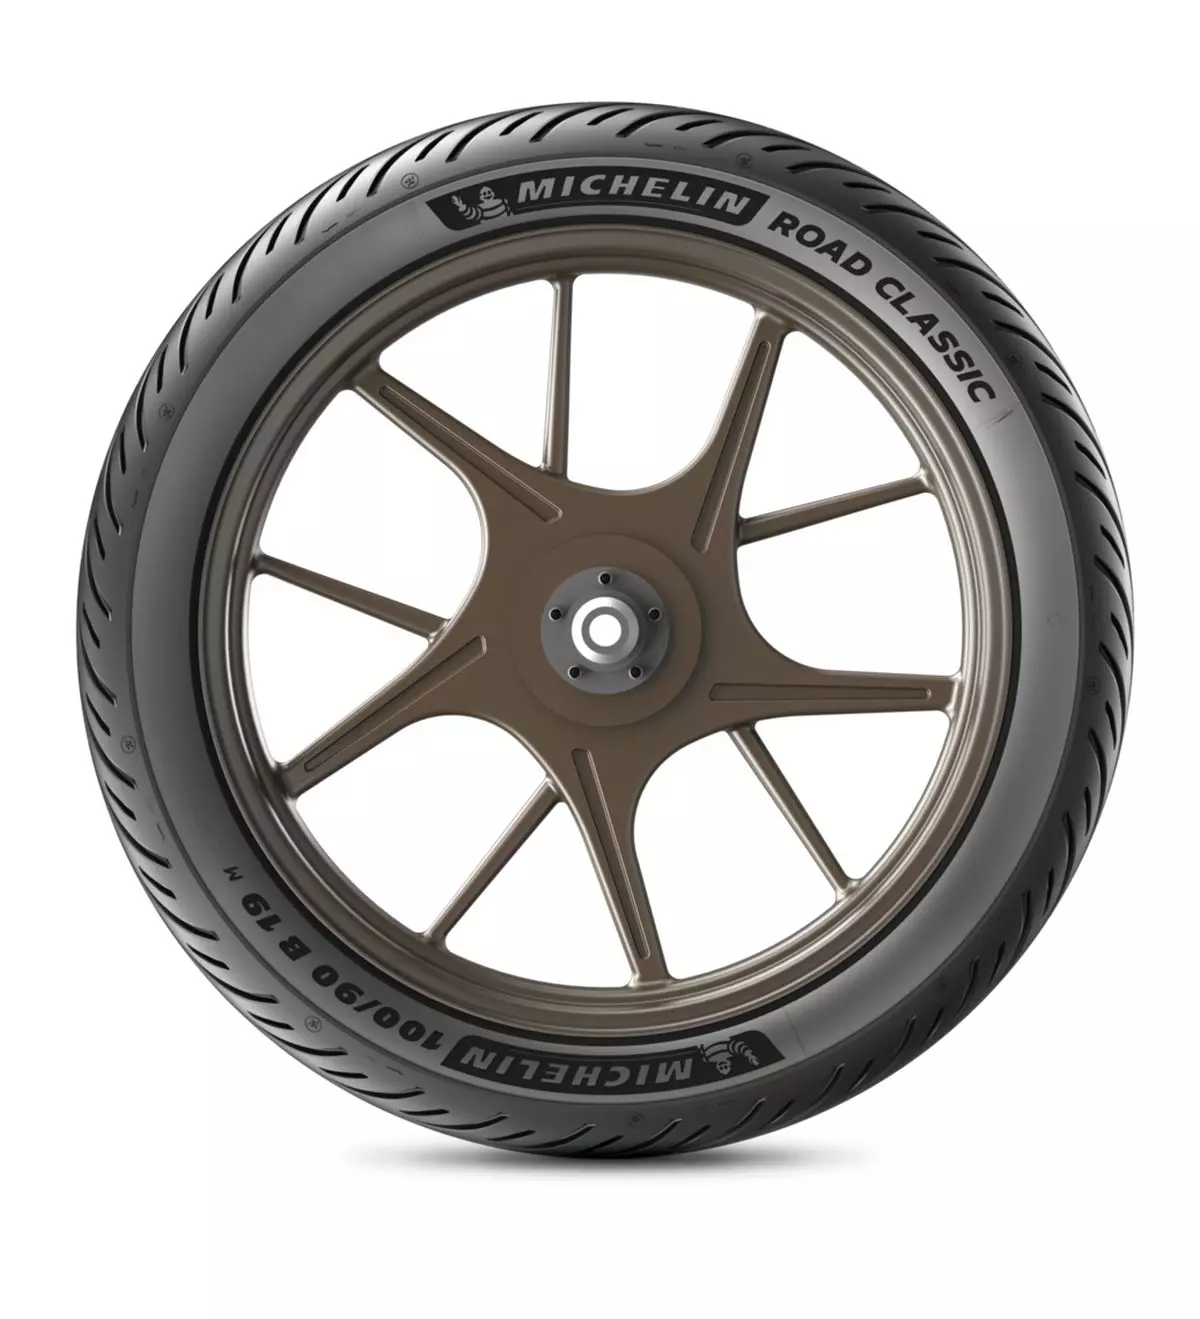 Покришка MICHELIN ROAD CLASSIC 150/70R17 69H TL